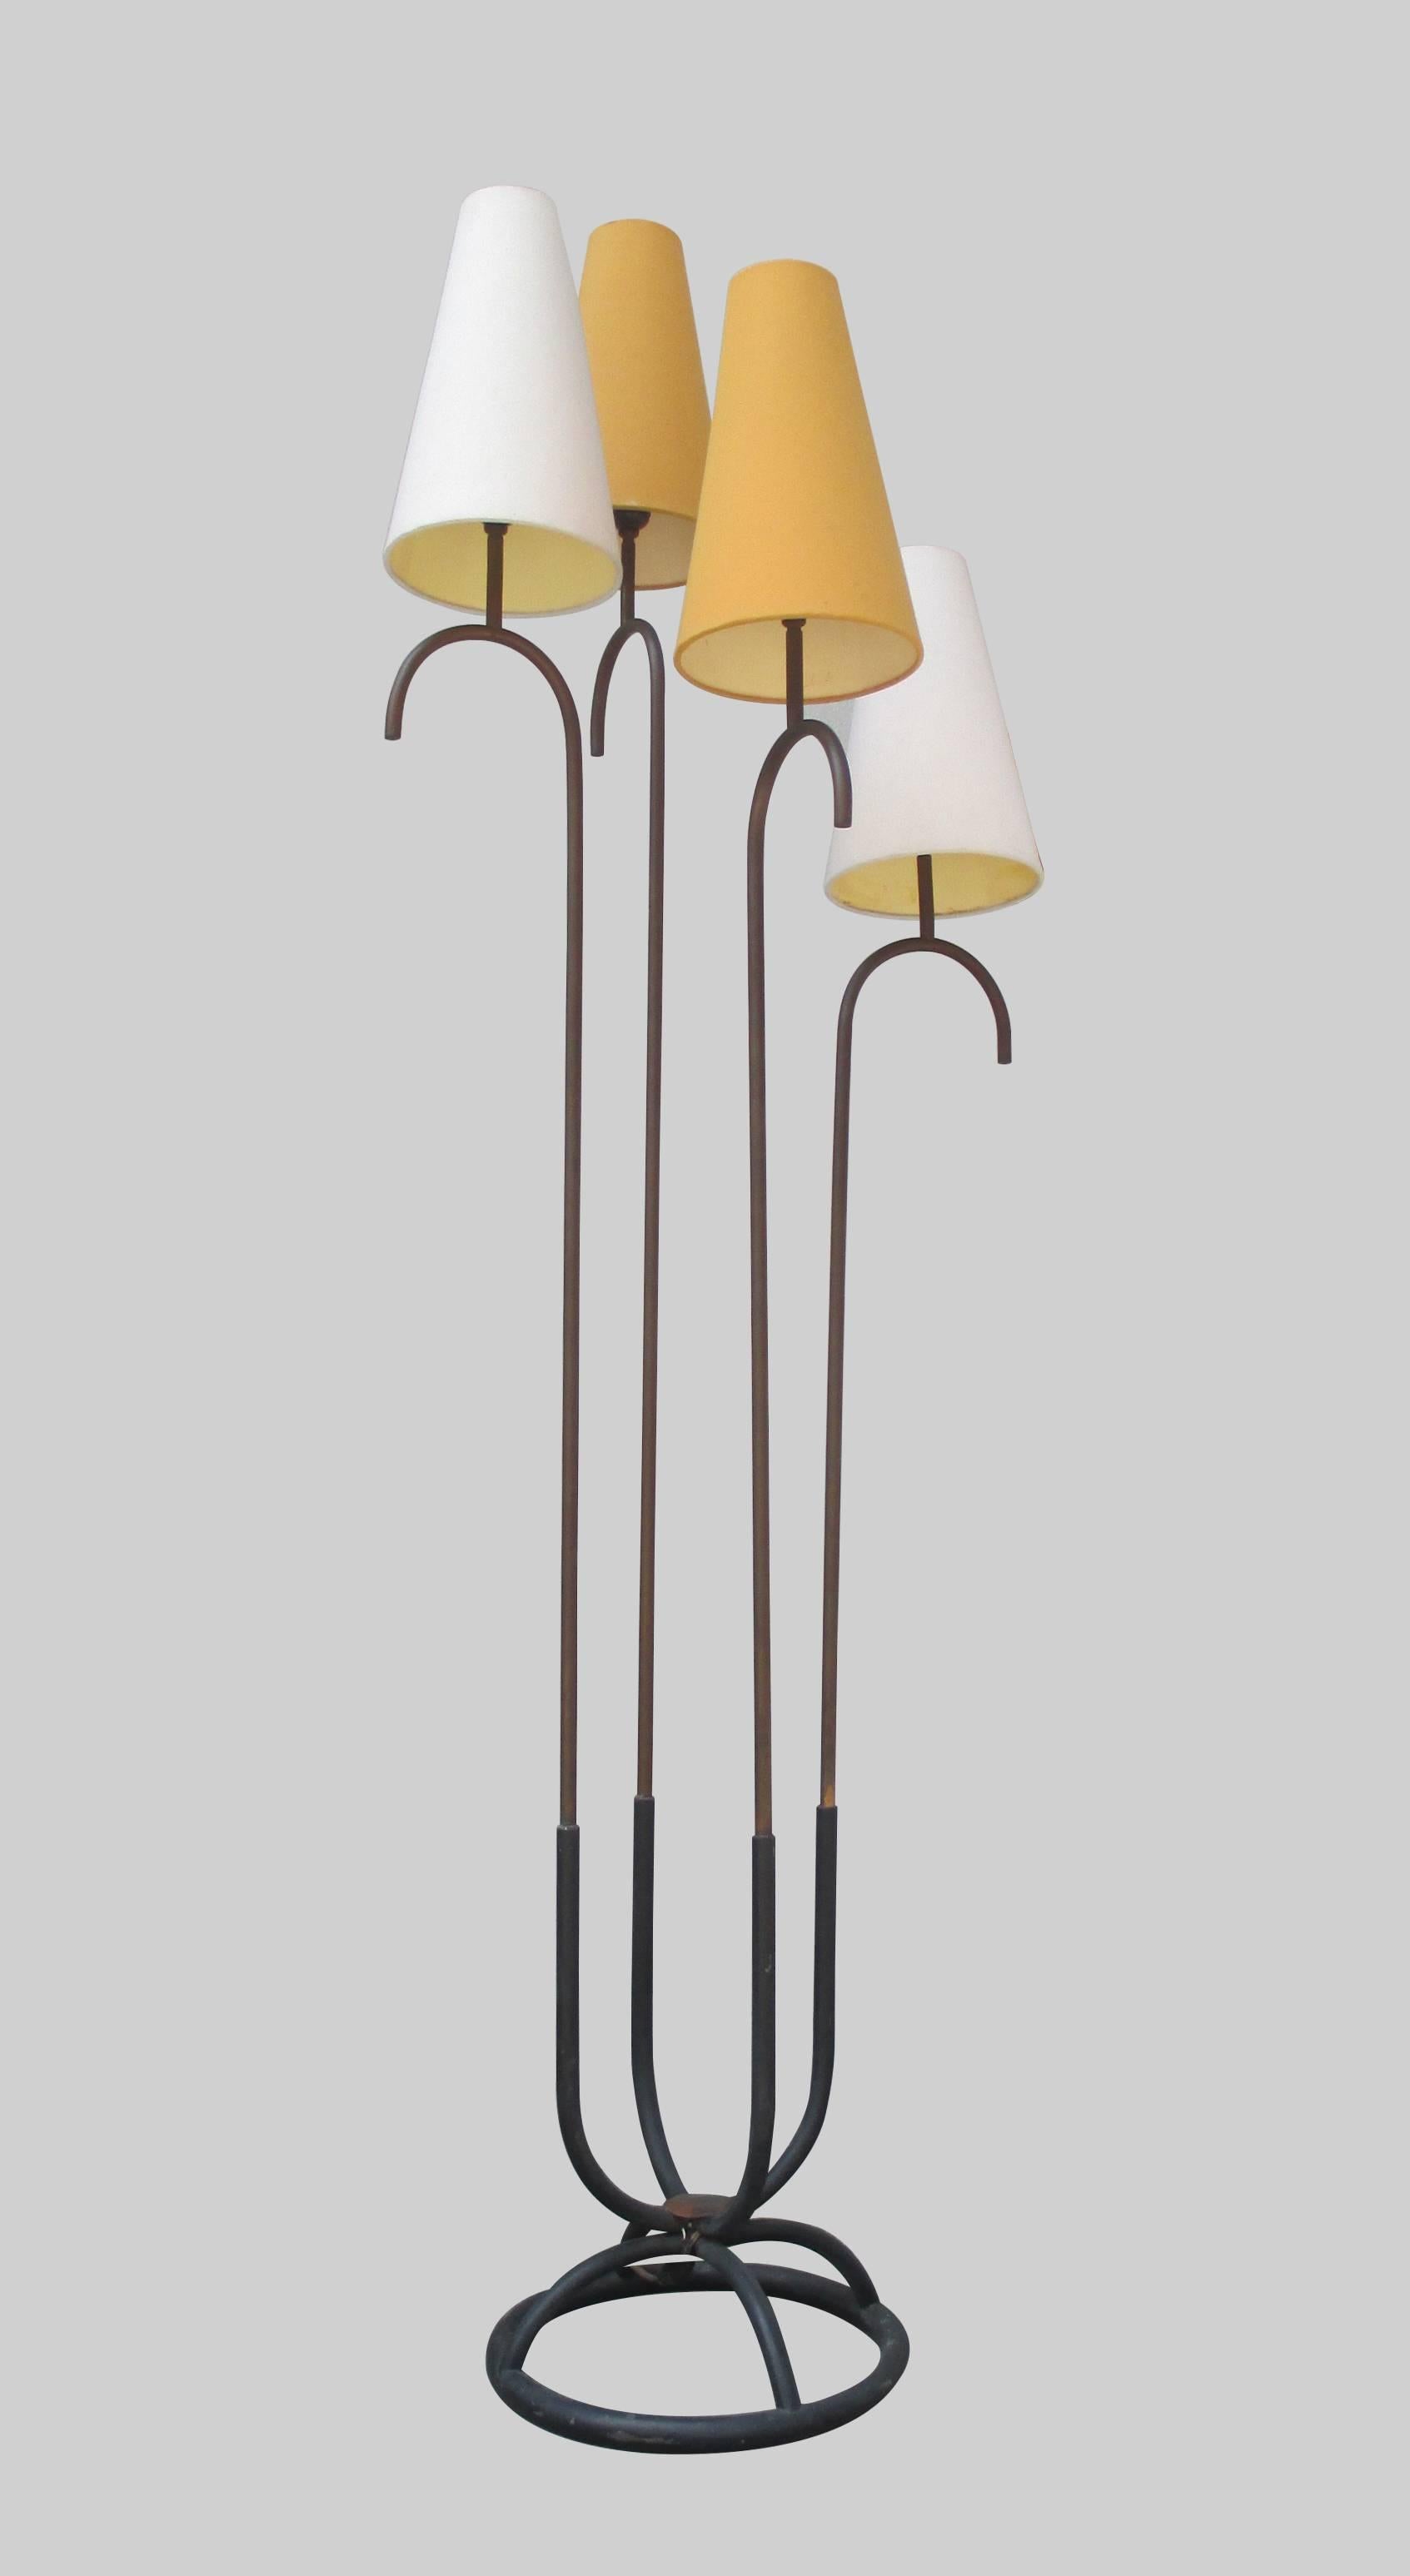 Floor lamp in the style of Jean Royere made by the Mexican designer Arturo Pani in the 1950s.
Fully functional with original lamp shades.